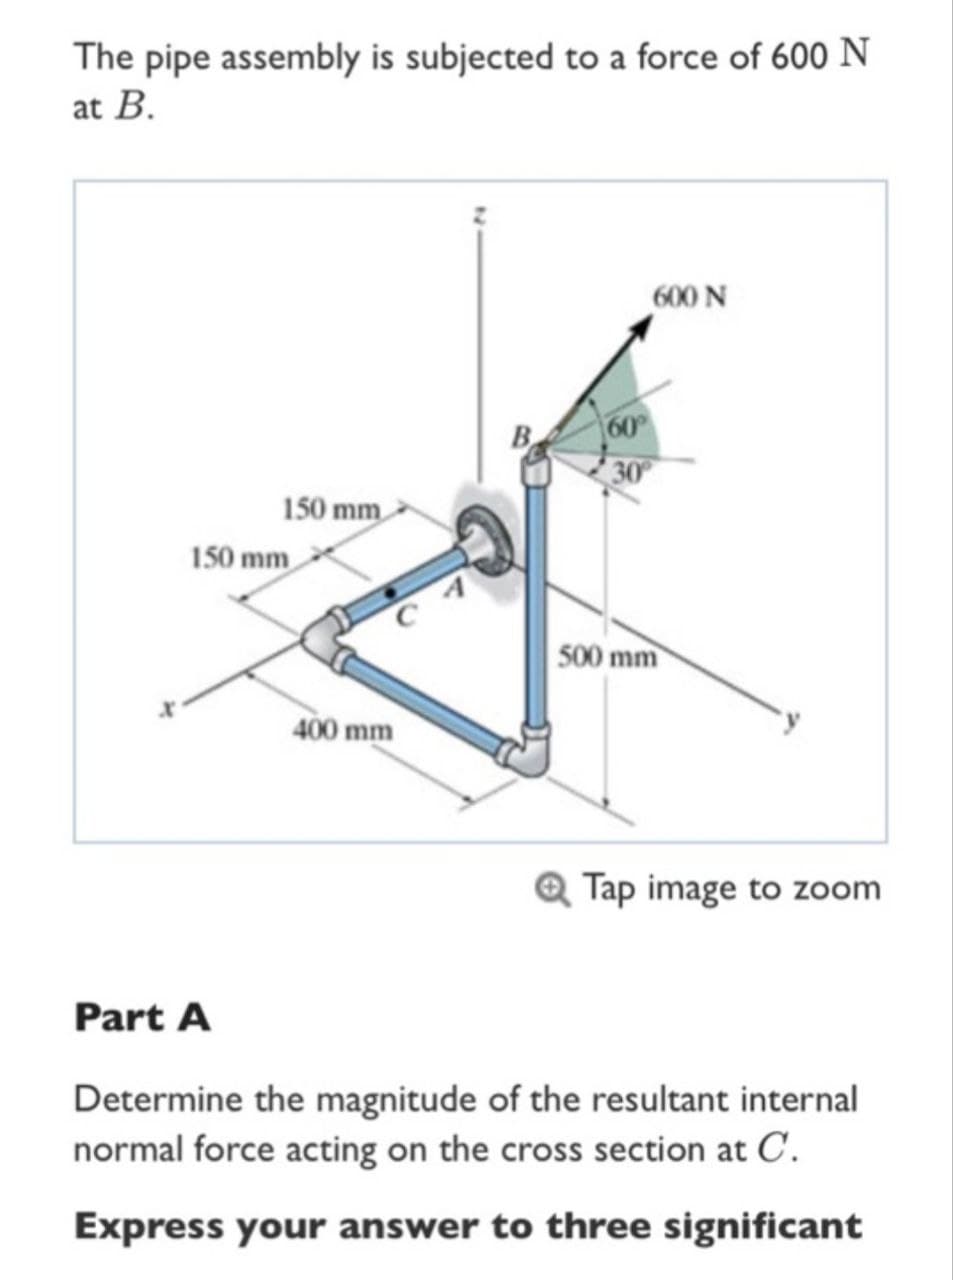 The pipe assembly is subjected to a force of 600 N
at B.
150 mm
150 mm
400 mm
B
30
600 N
500 mm
Tap image to zoom
Part A
Determine the magnitude of the resultant internal
normal force acting on the cross section at C.
Express your answer to three significant